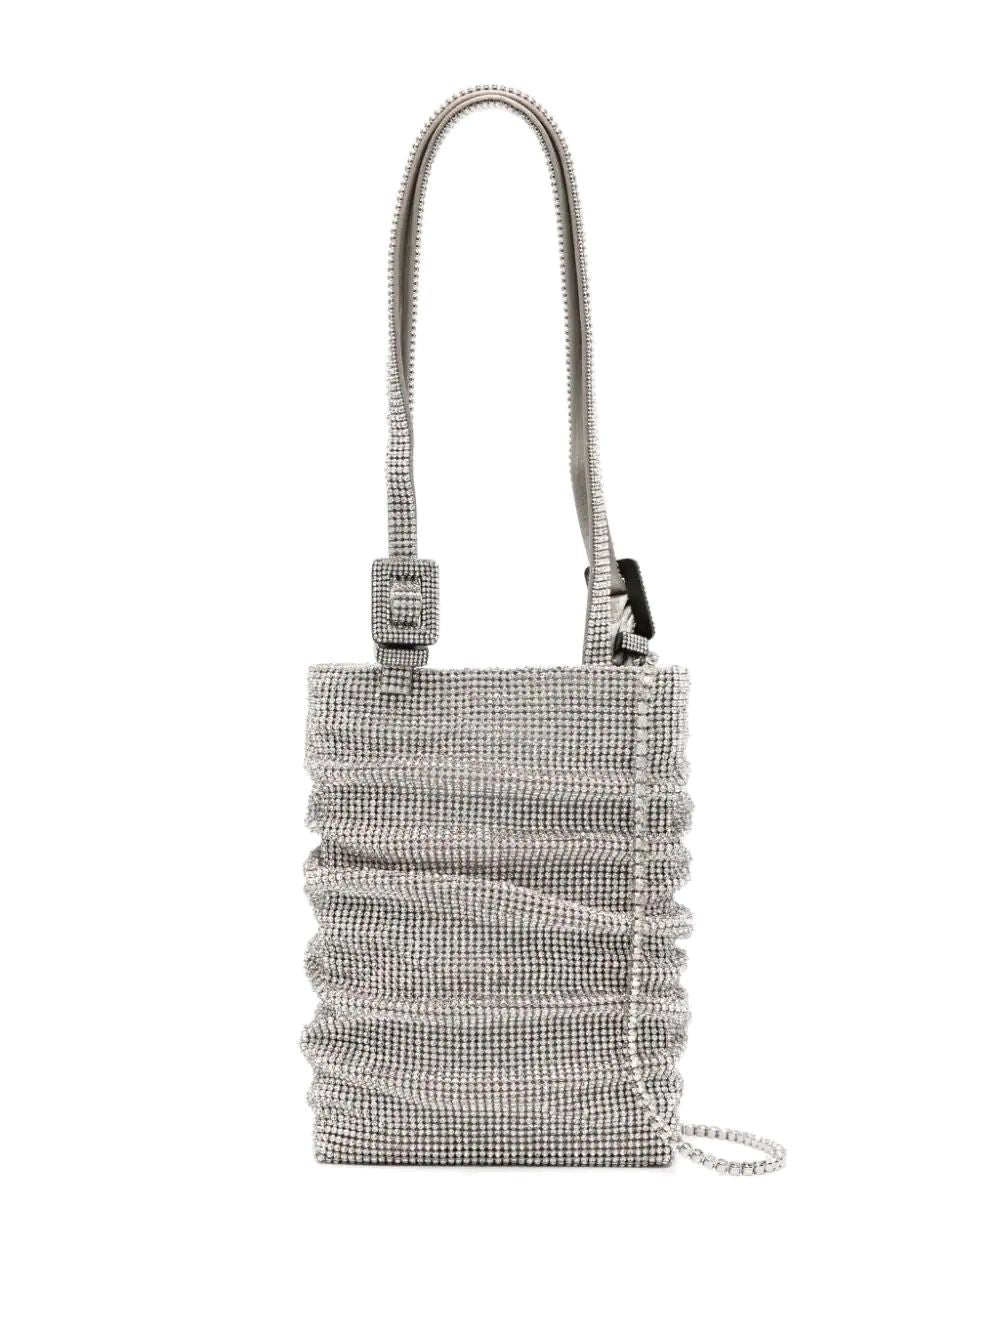 Tote bag with ruffles decorated with rhinestones